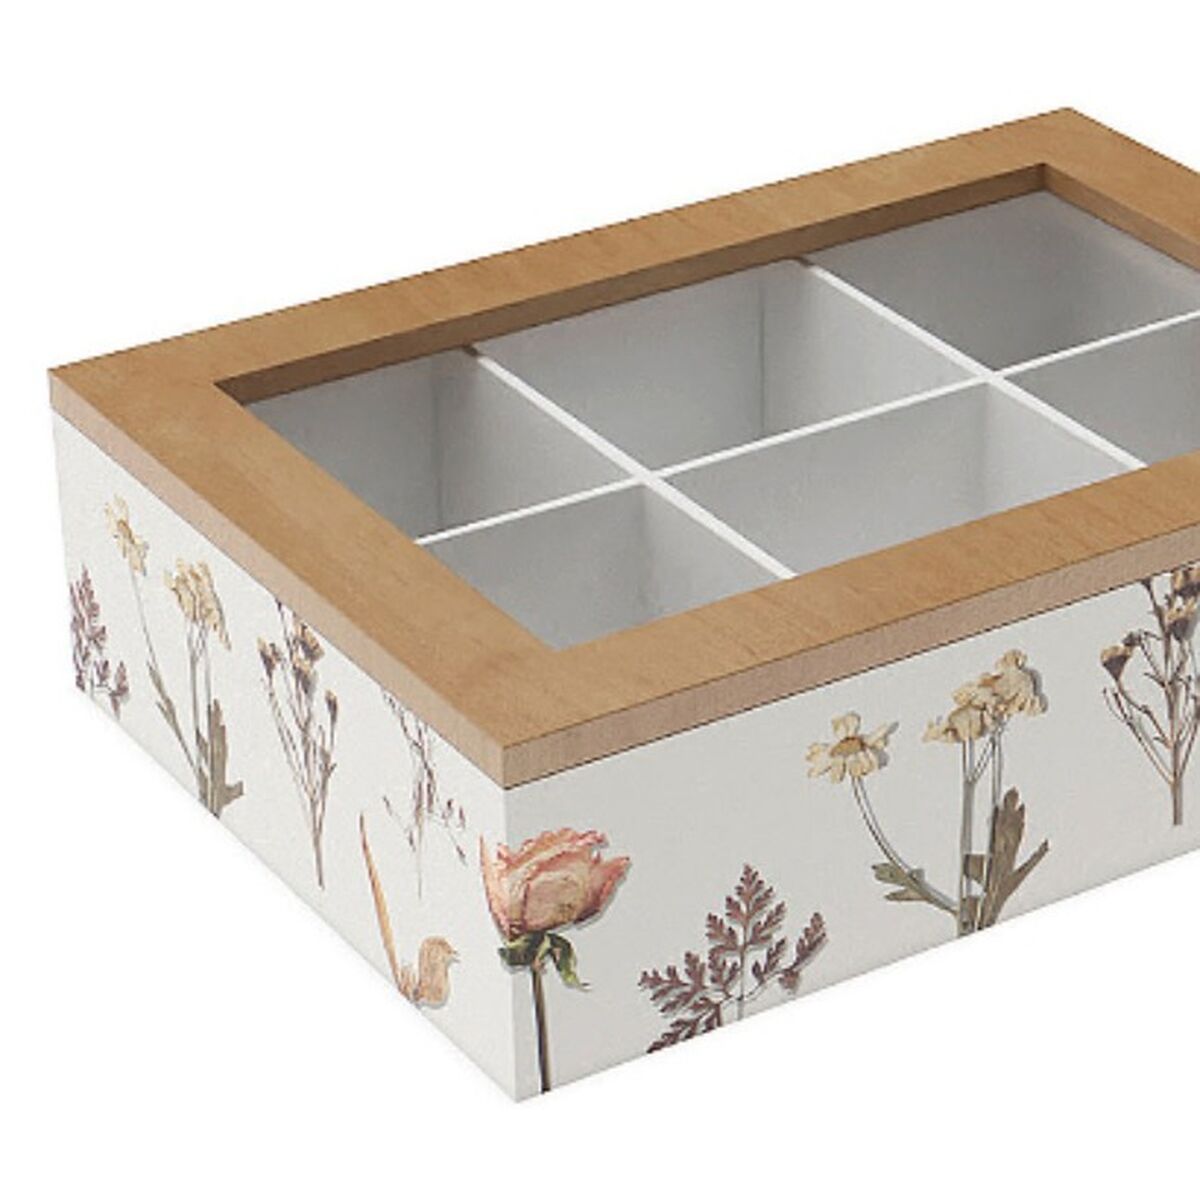 Box for Infusions Versa Wood 17 x 7 x 24 cm